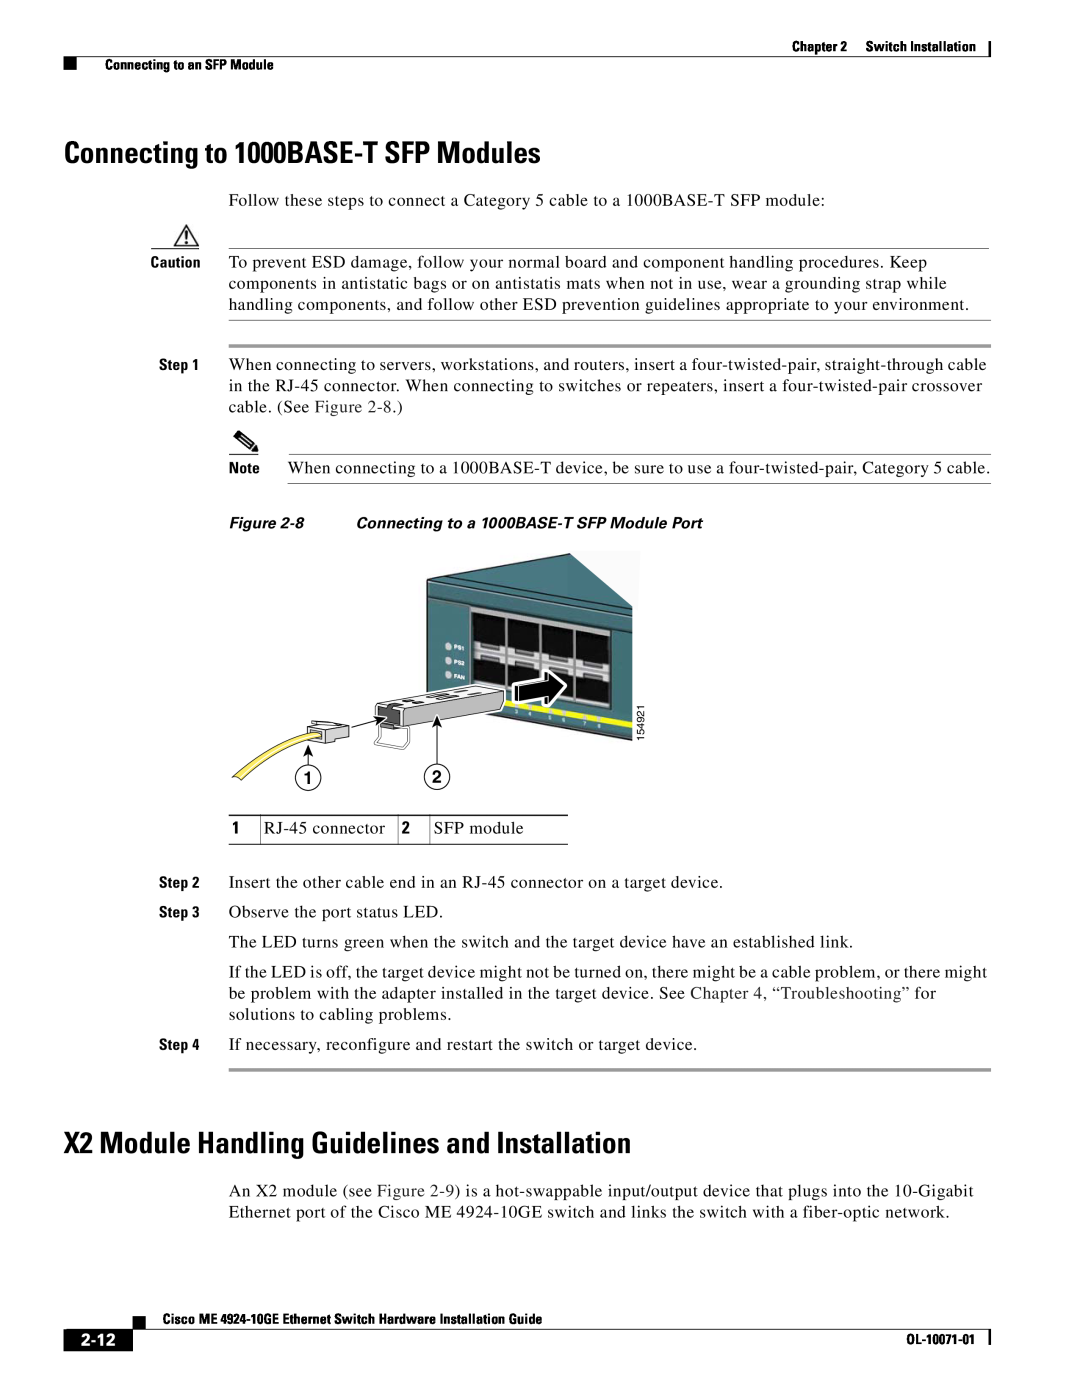 Cisco Systems ME 4924-10GE Connecting to 1000BASE-T SFP Modules, X2 Module Handling Guidelines and Installation, 2-12 